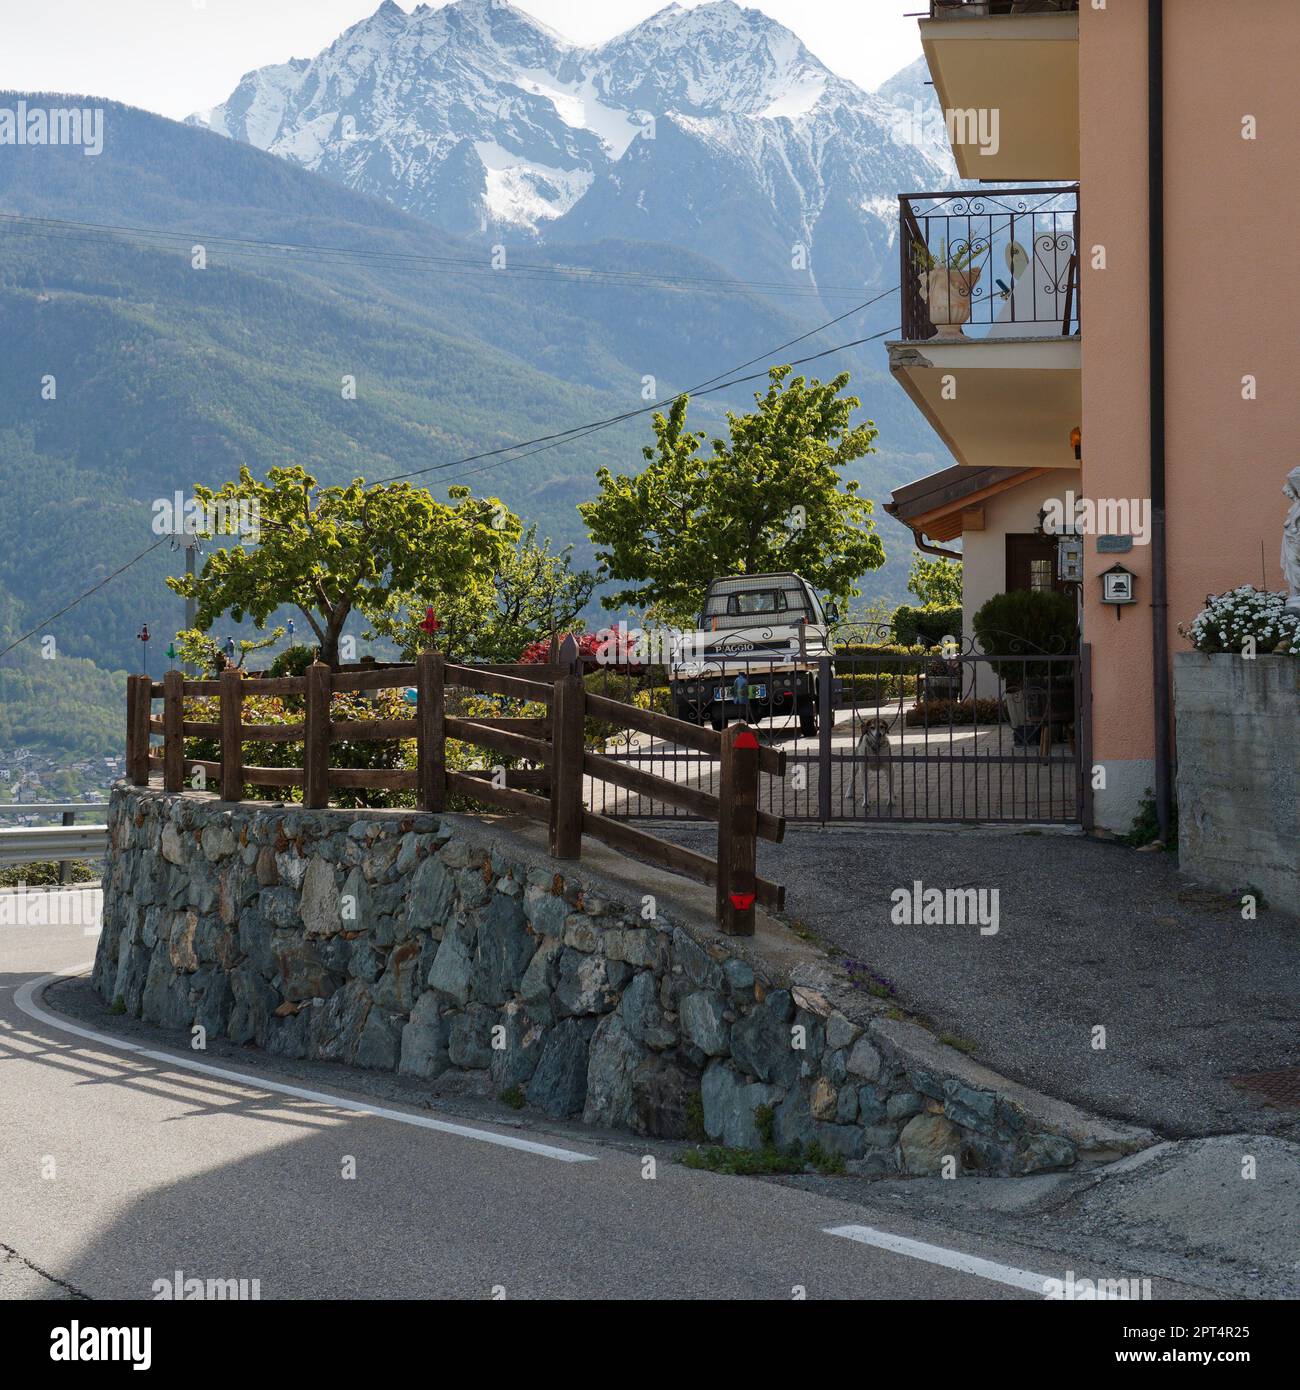 House with raised stone built driveway with a Ape car, dog and a balcony. Snow capped alpine mountains behind. Aosta Valley, NW Italy Stock Photo